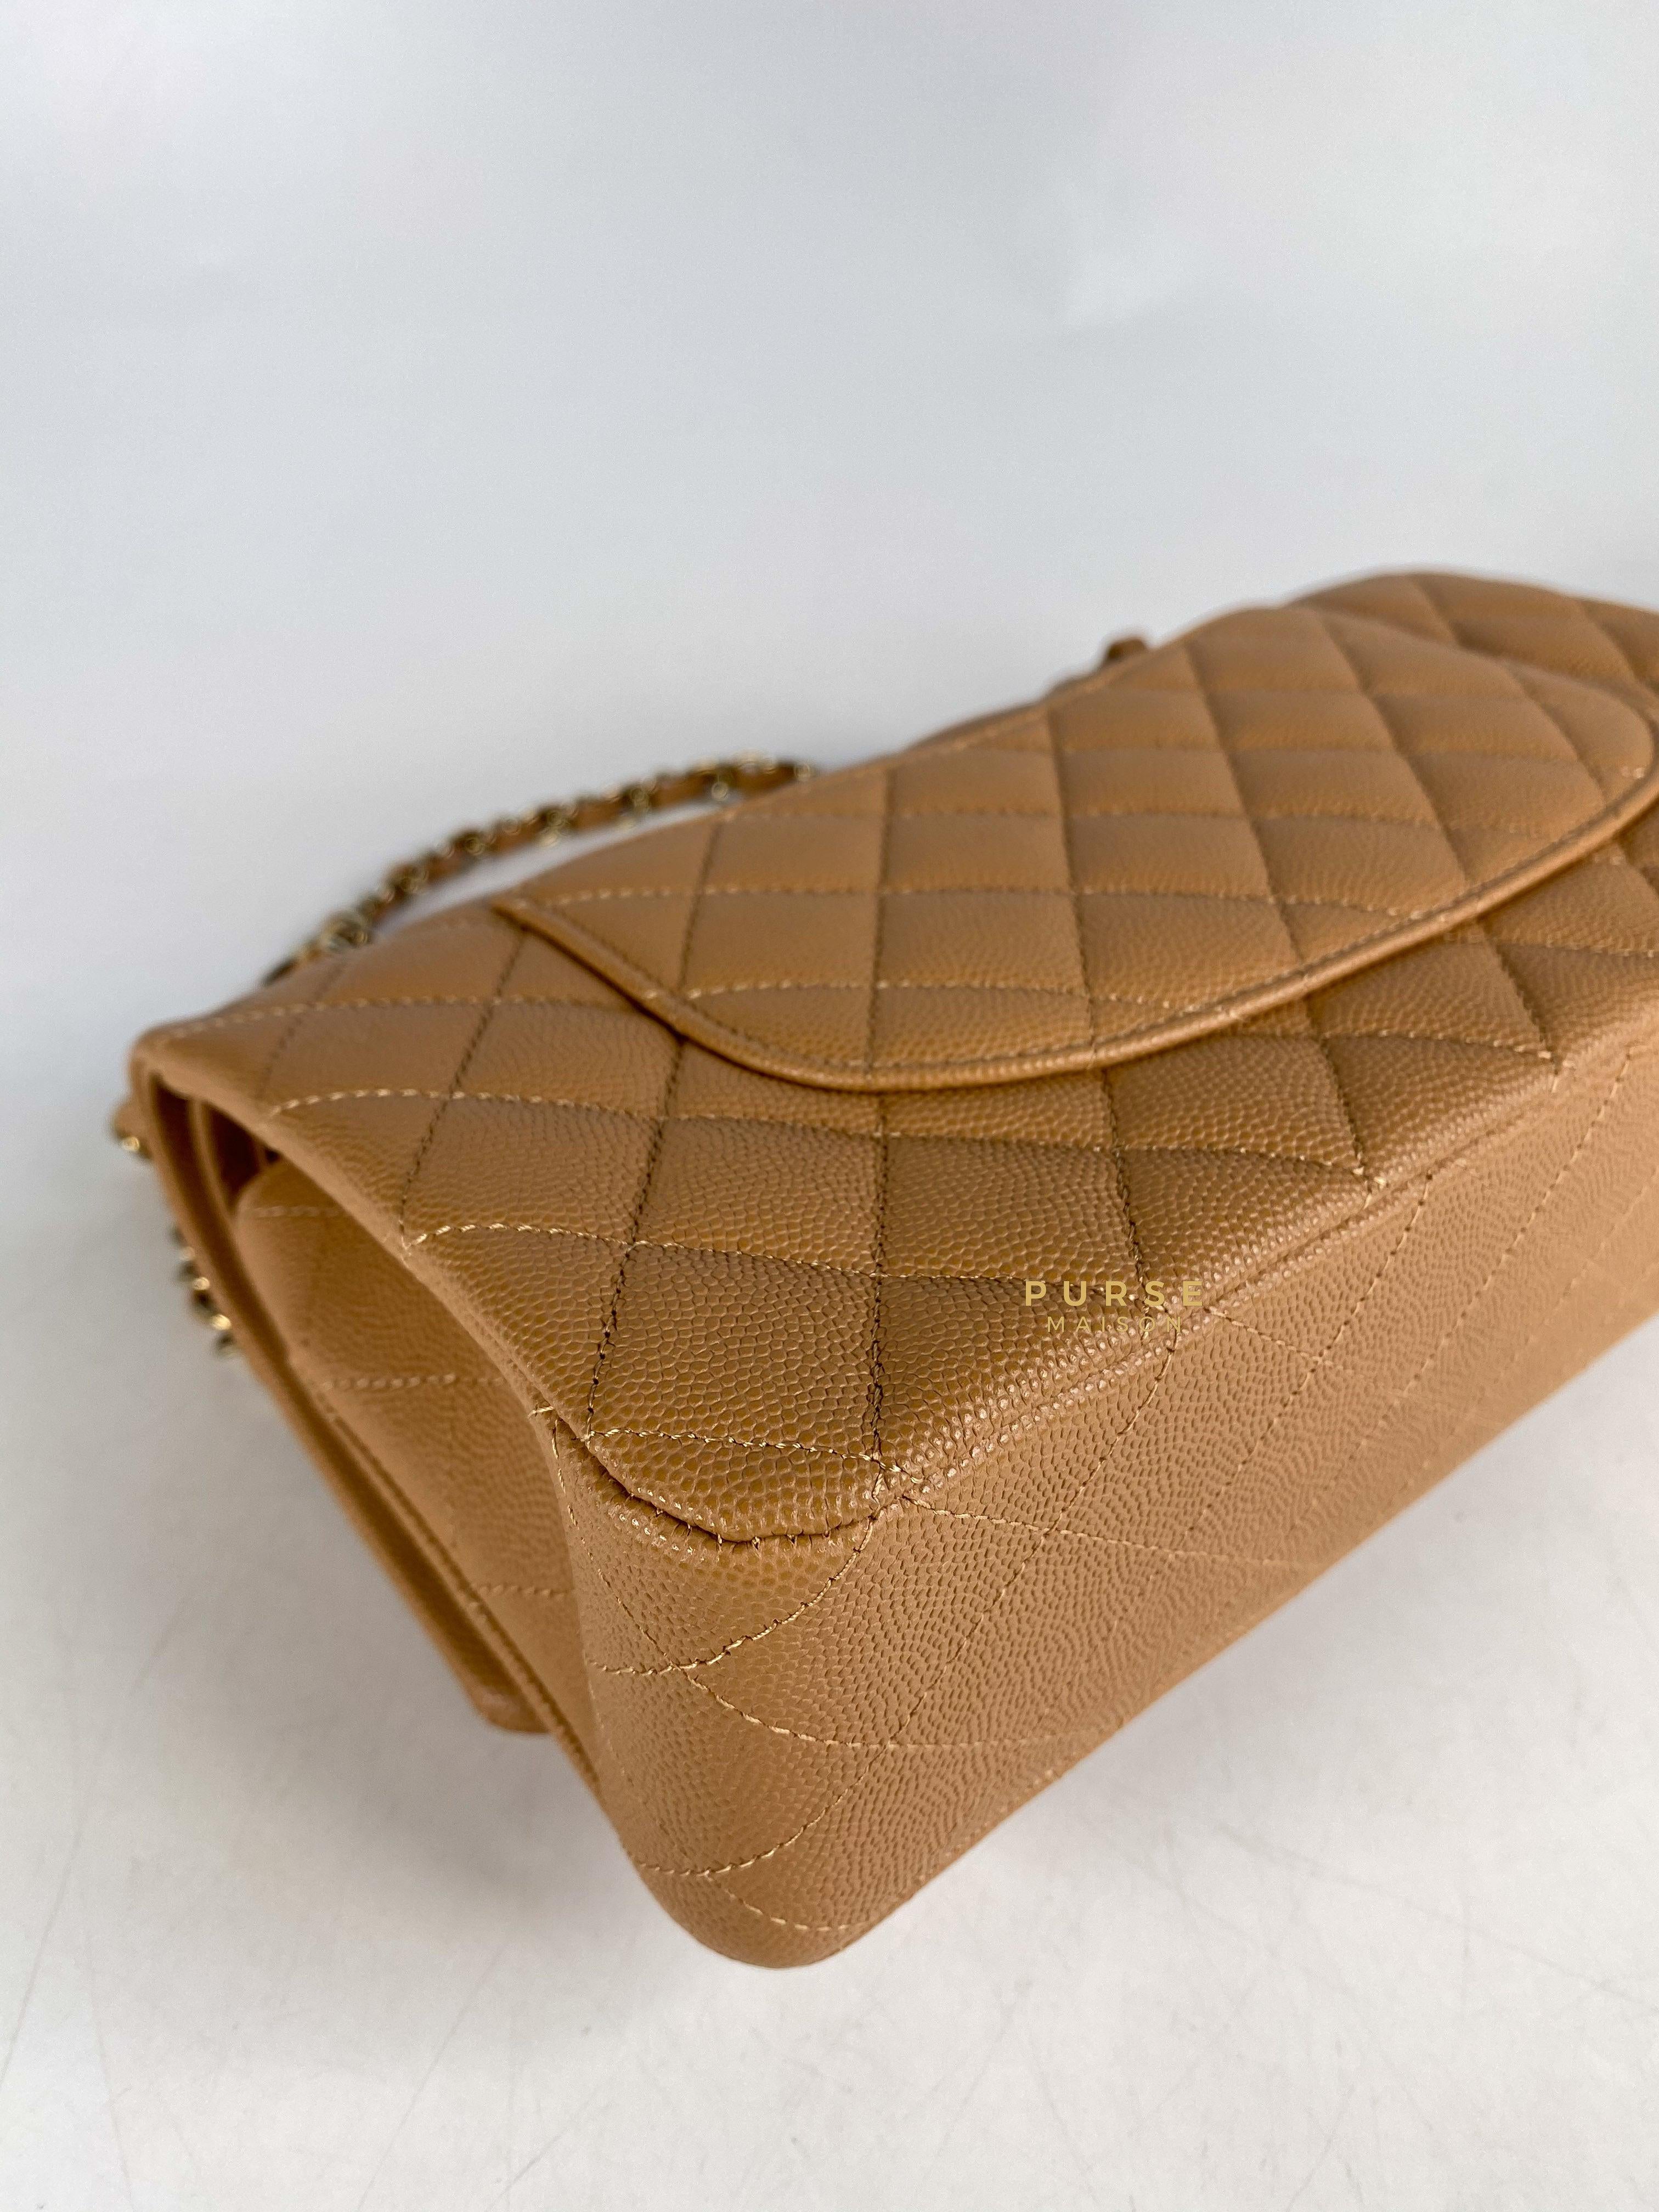 Chanel 23p Caramel Classic Double Flap Medium in Caviar Leather and Light Gold Hardware (Microchip) | Purse Maison Luxury Bags Shop